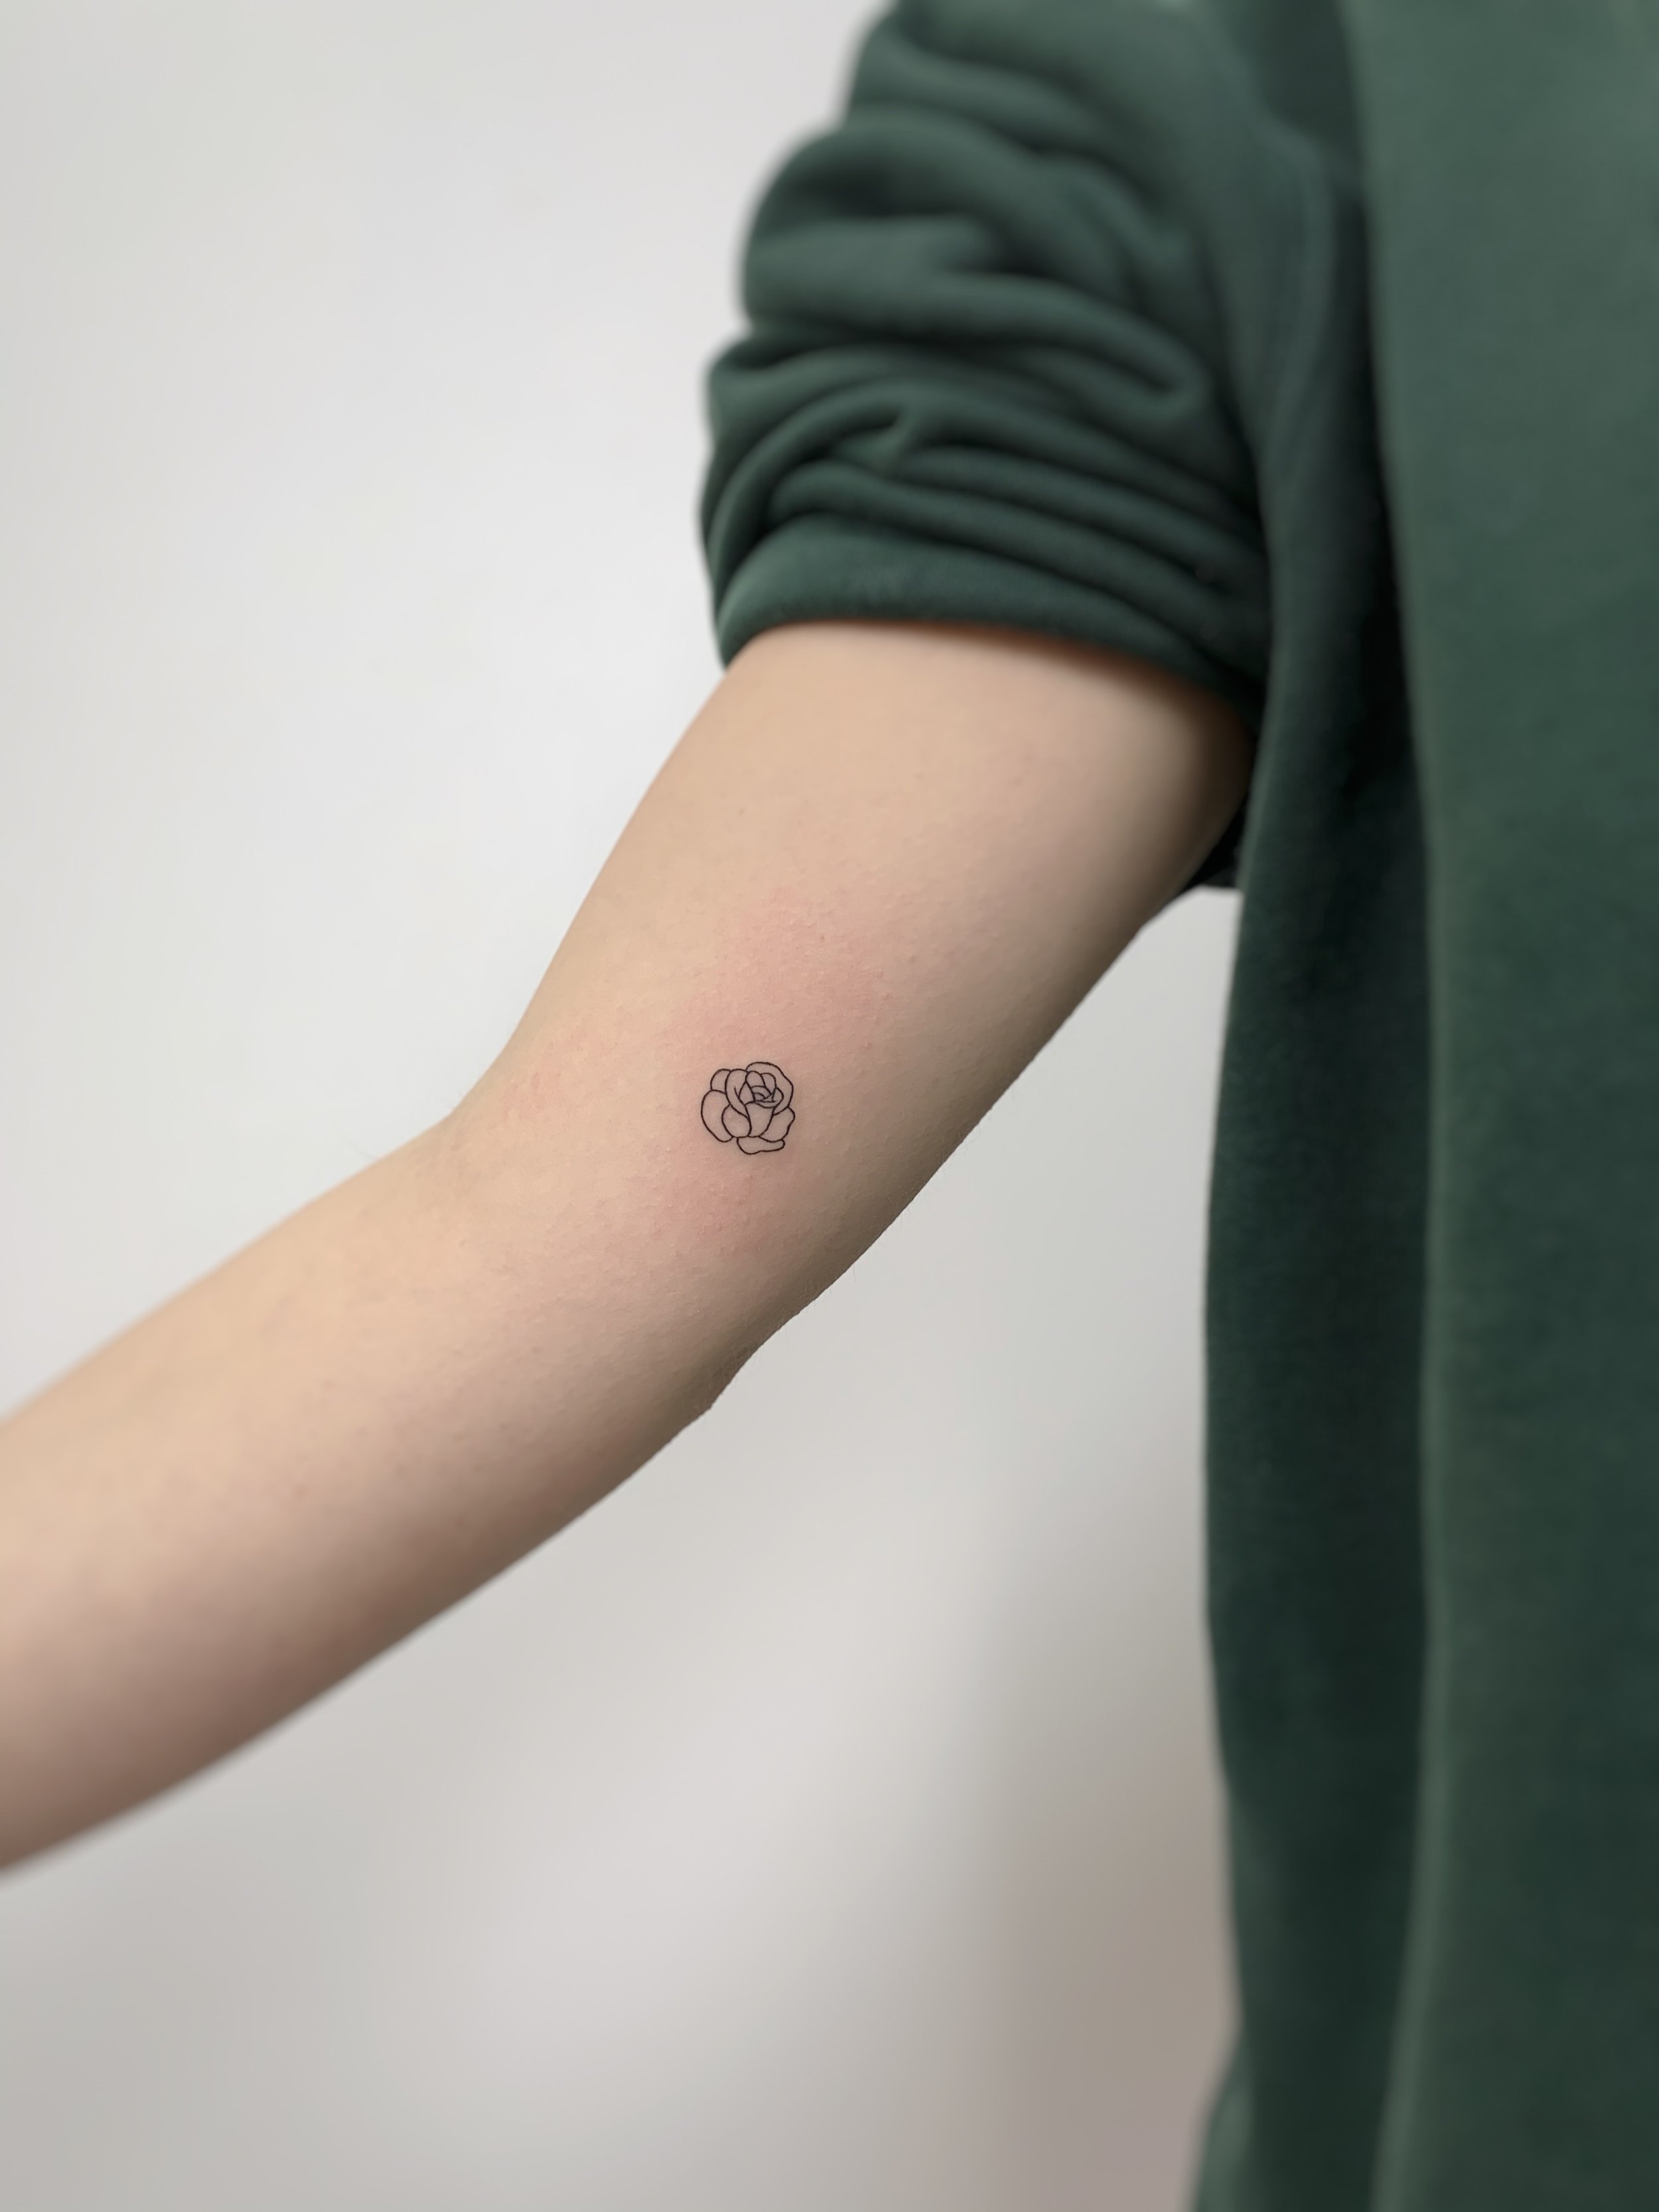 10 Delicate & Elegant Tattoo Ideas You'll Love If You're A Virgo